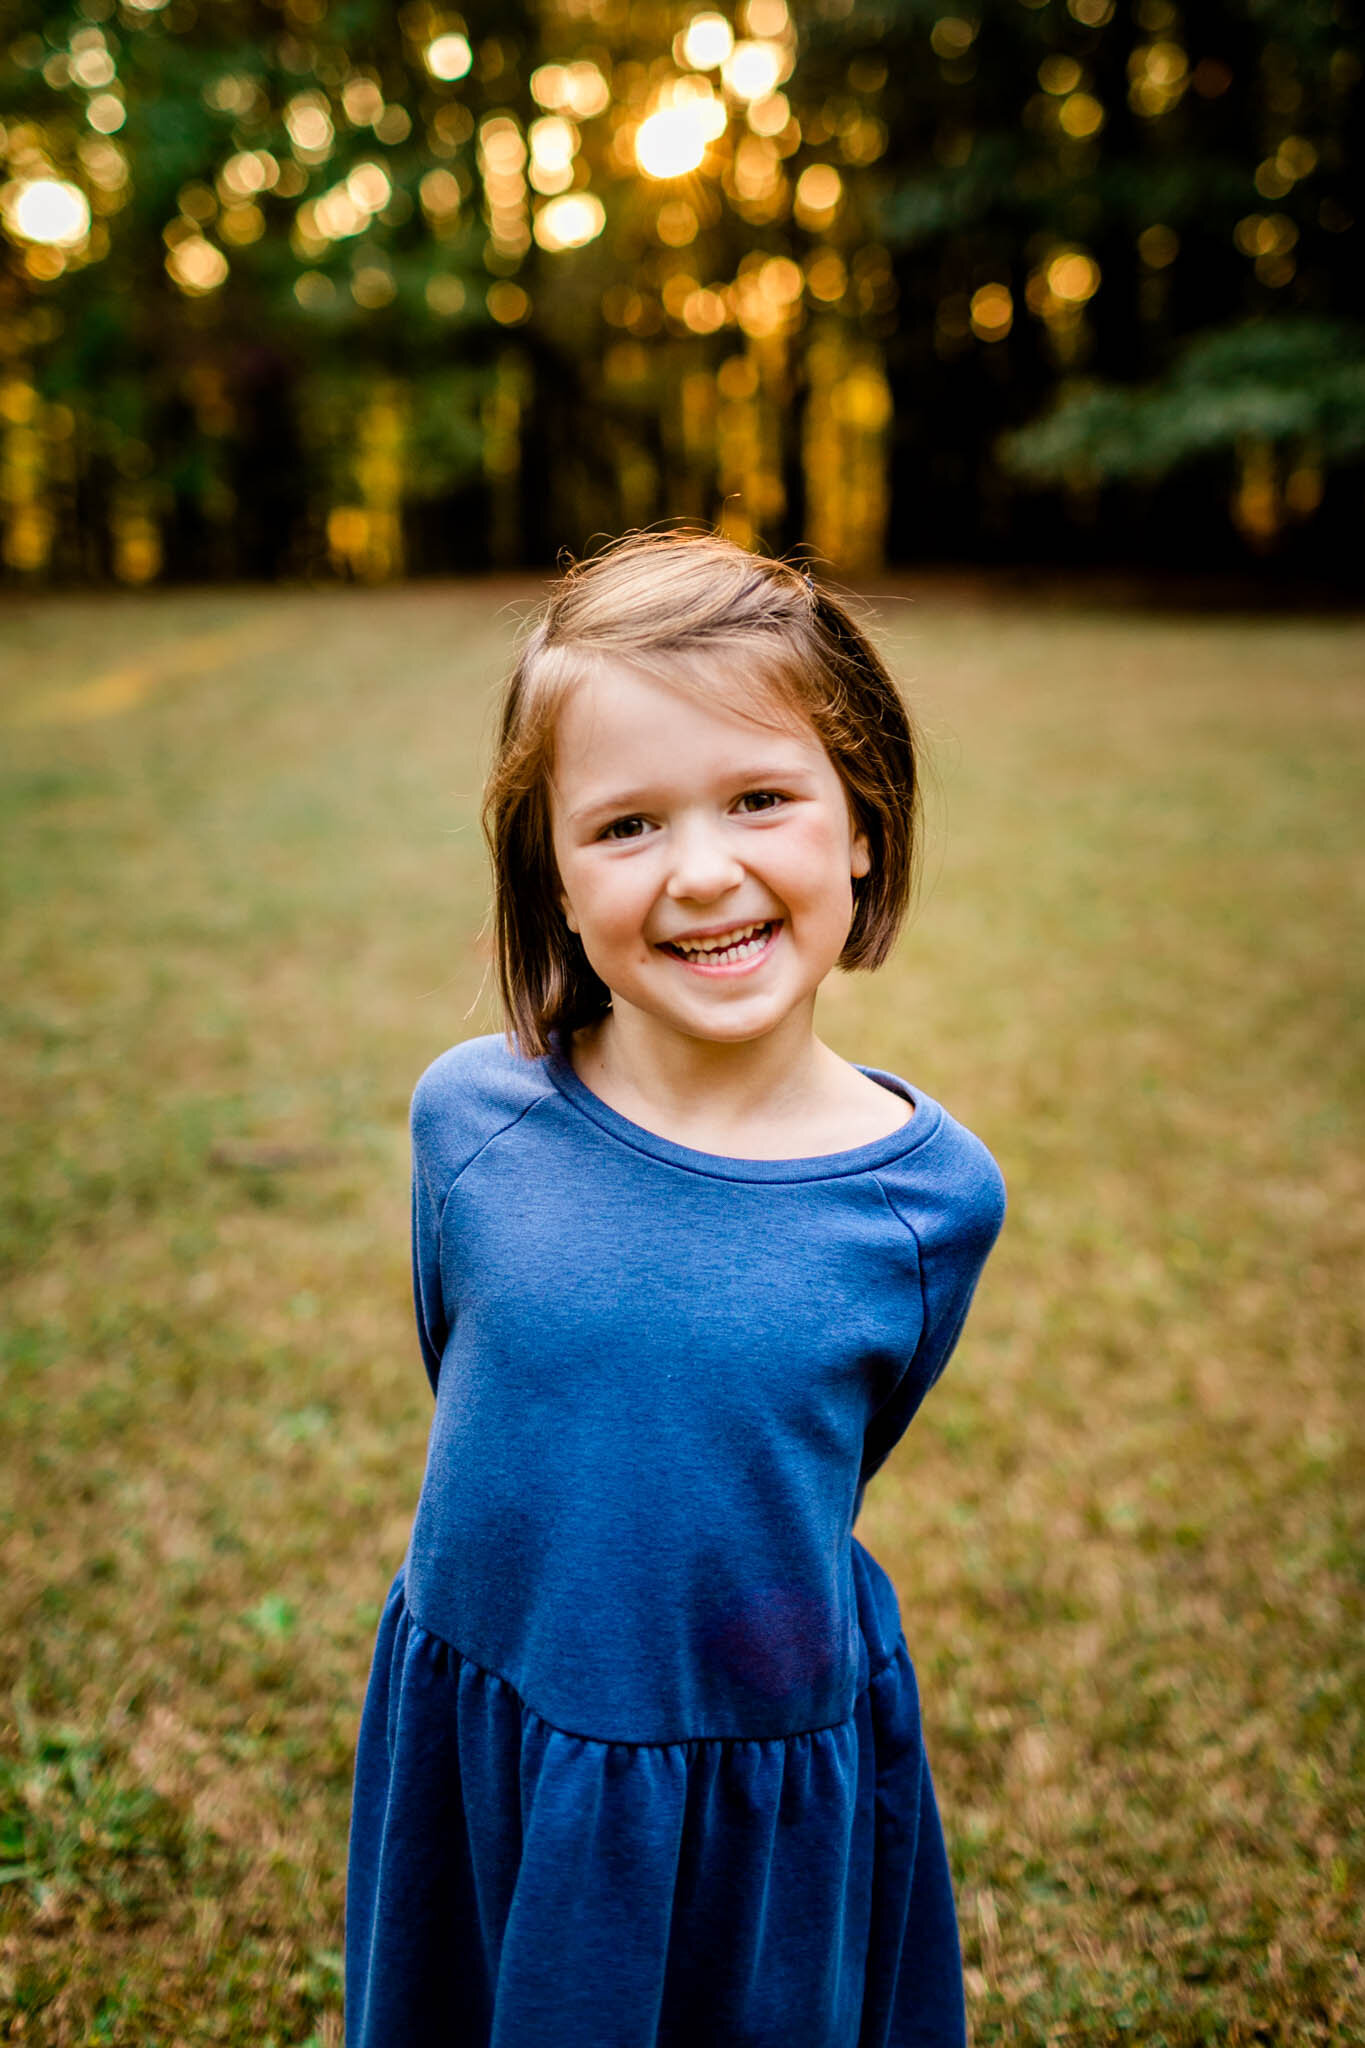 Raleigh Family Photographer | Umstead Park | By G. Lin Photography | Sunset portrait of young girl smiling